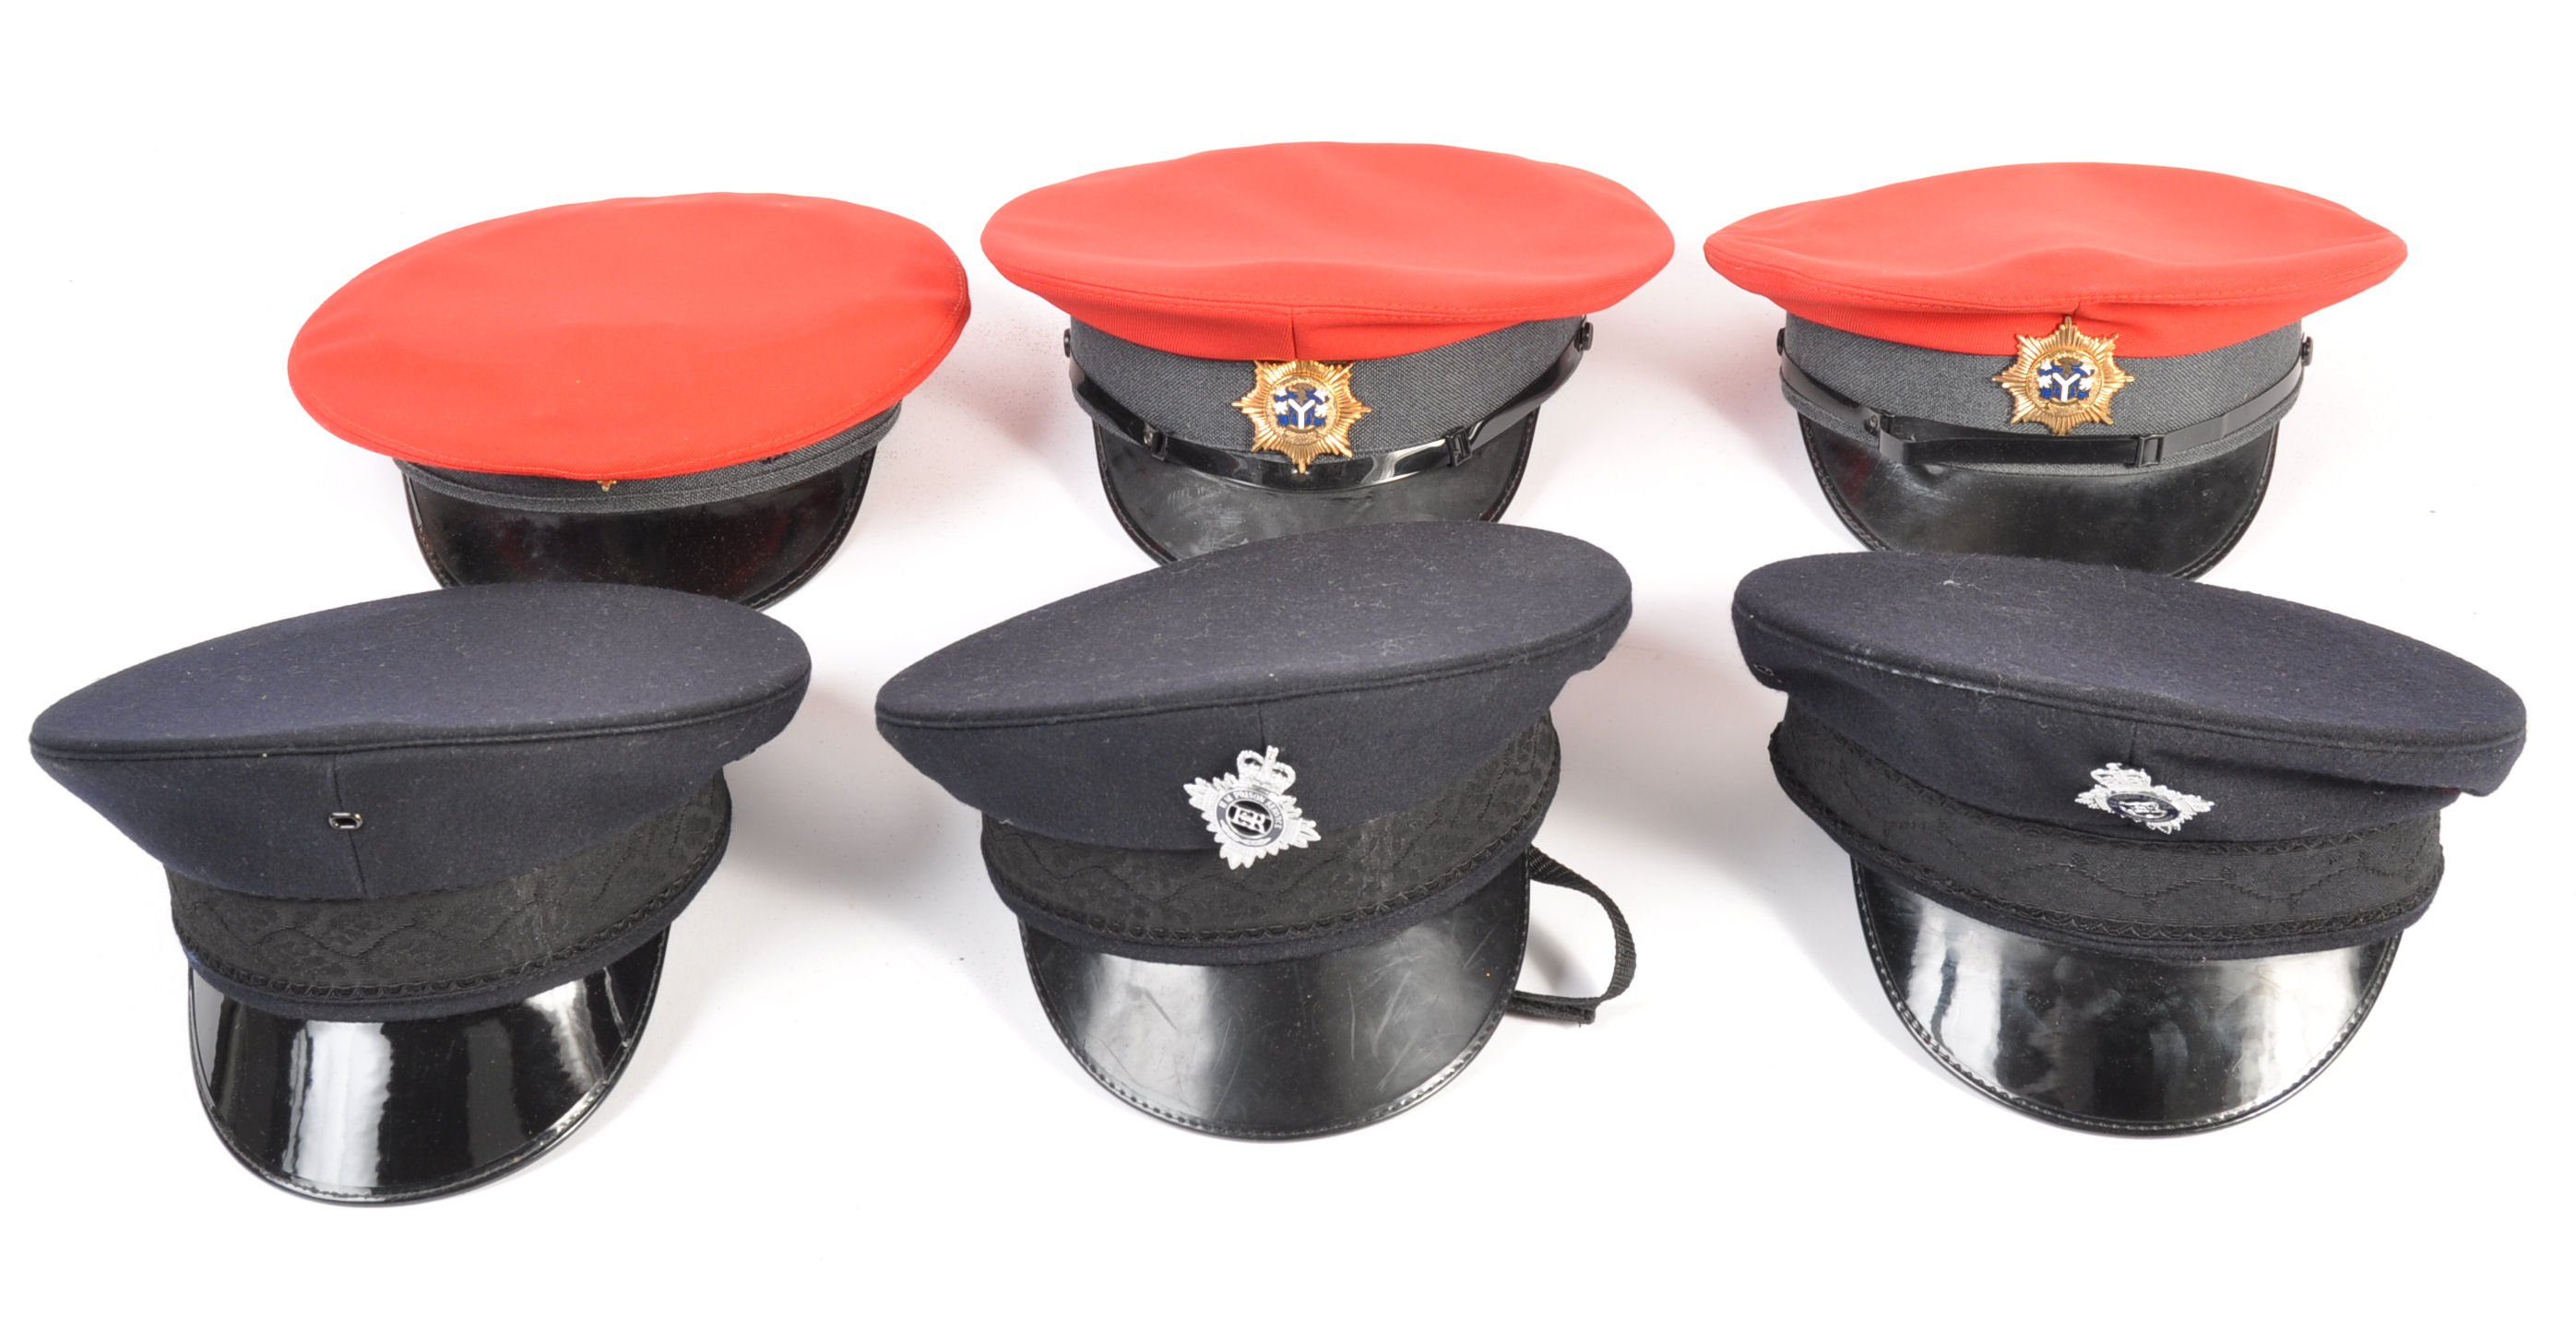 UNIFORM AND FANCY DRESS - A COLLECTION OF SIX MILITARY SERVICE CAPS.